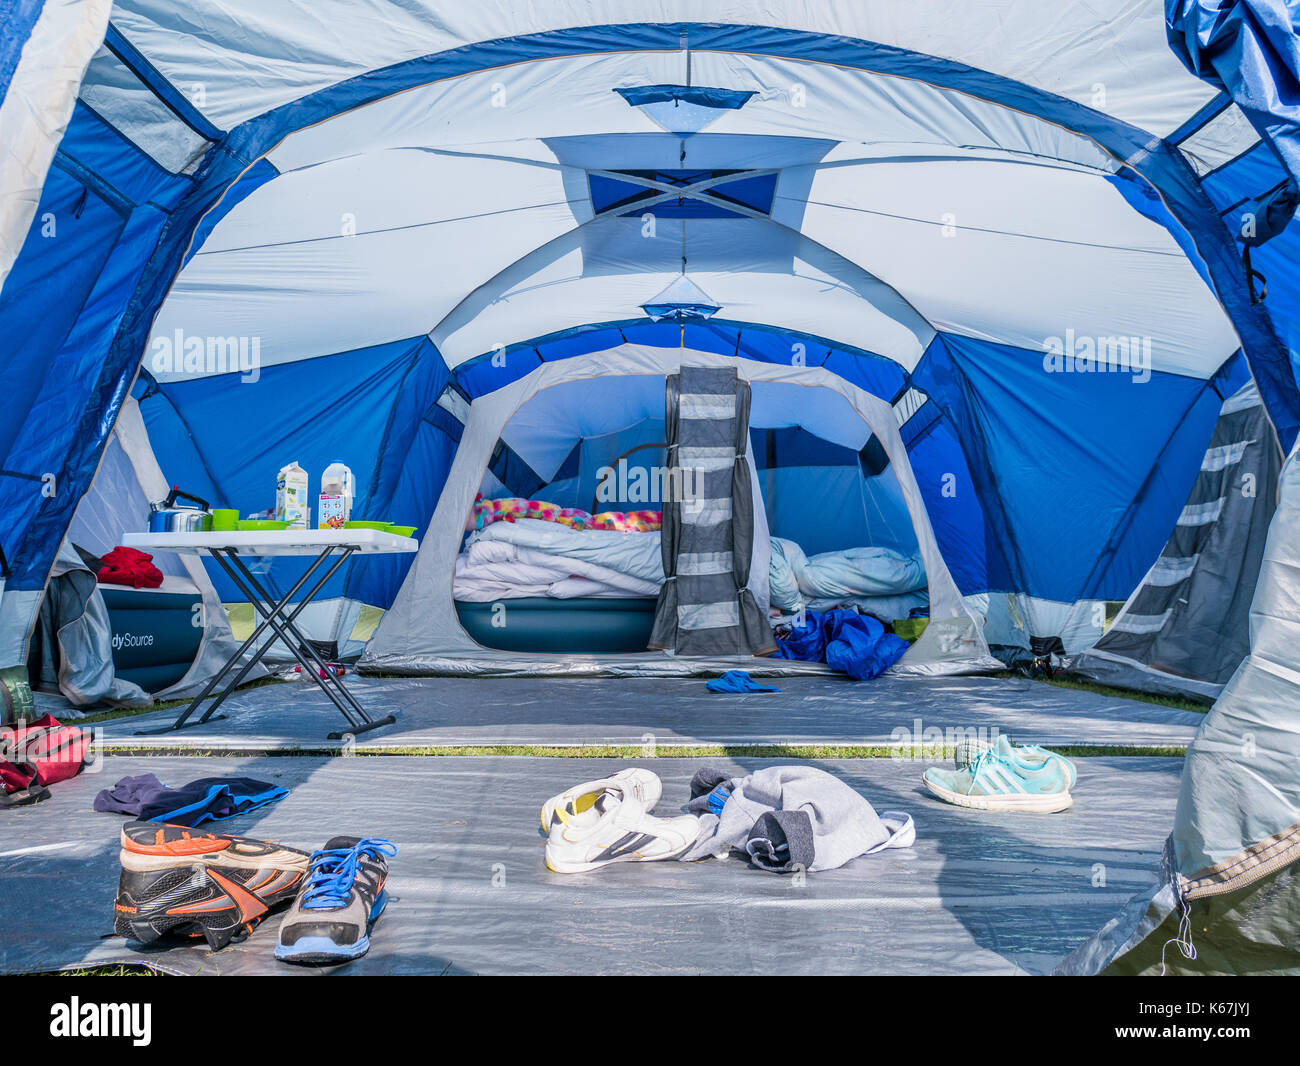 Interior of a family tent for camping outdoors in a field Stock Photo -  Alamy